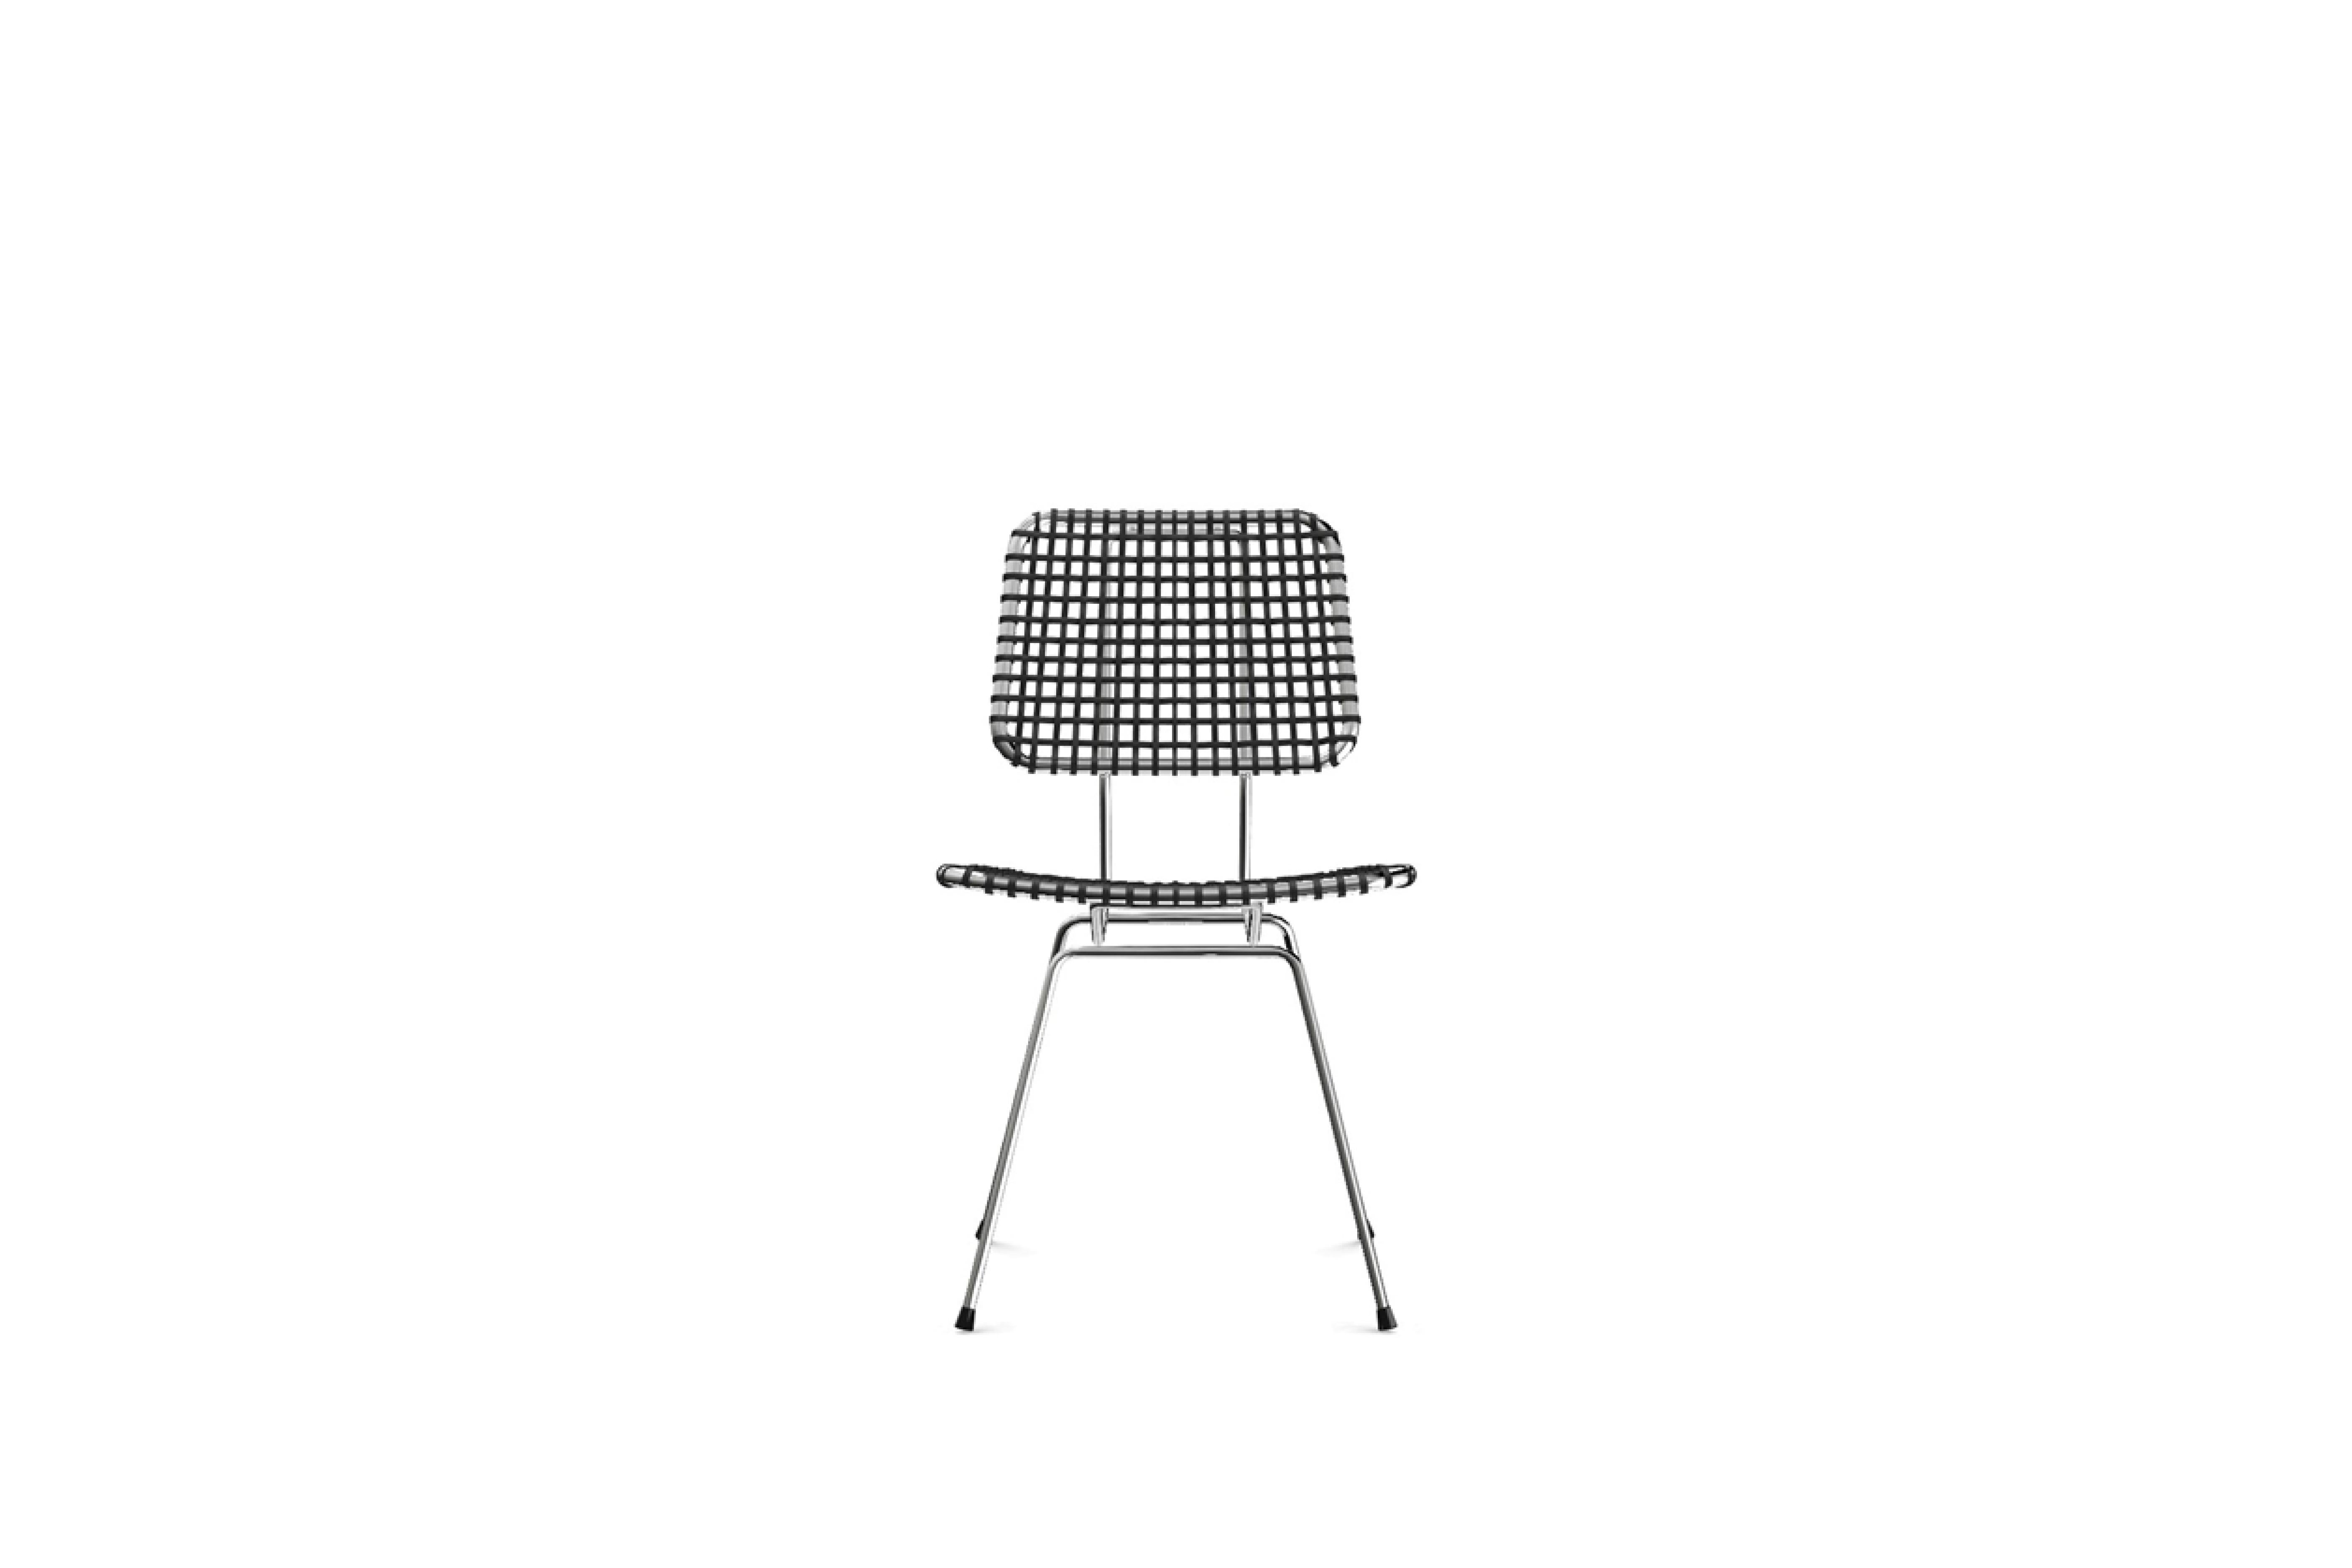 The Brick 23 chair without armrests has a structure in polished chromed steel rod. Light lines and low thicknesses are emphasised by the grey parchment weave of the seat and backrest.

Chair, chromed steel frame, seat and back handwoven with grey